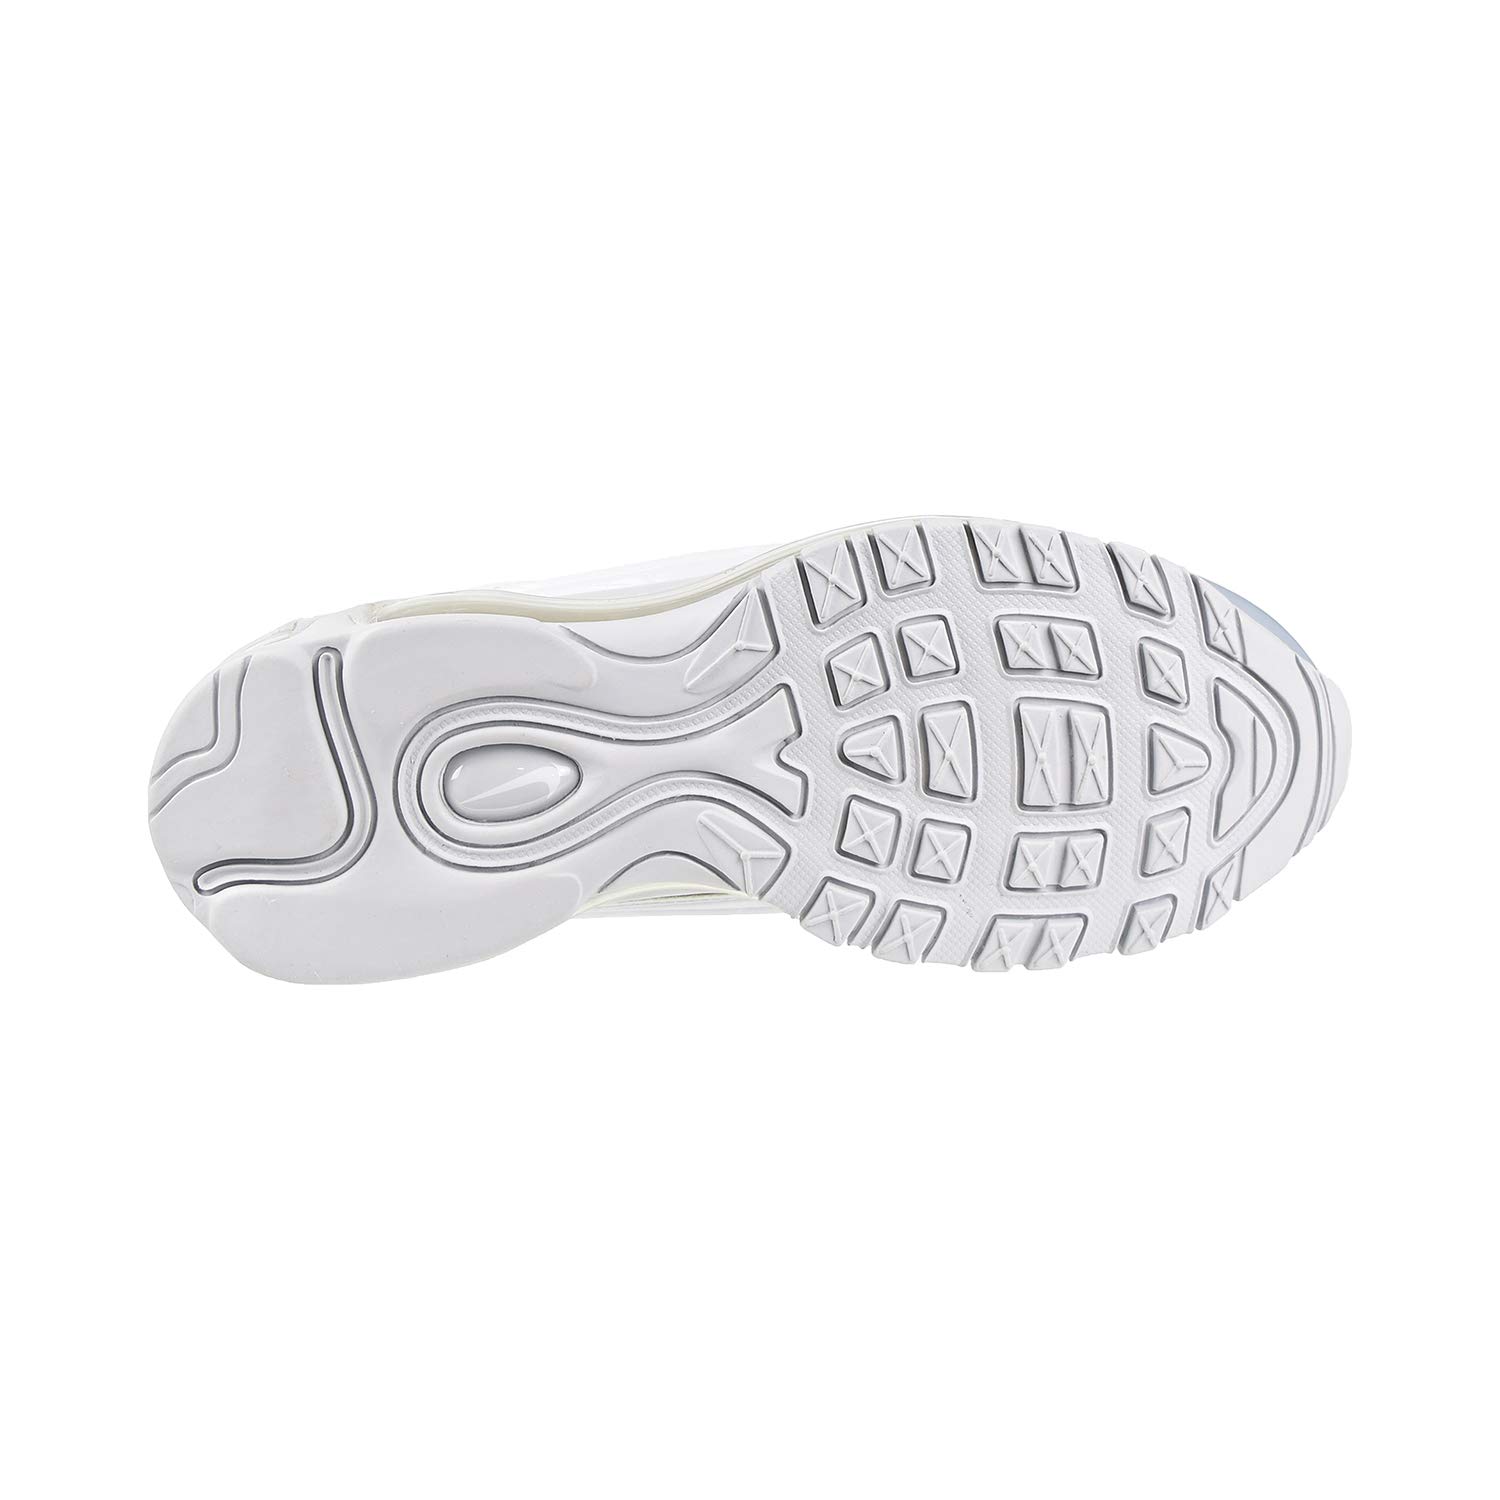 Nike Air Max Deluxe SE Womens Running Trainers AT8692 Sneakers Shoes (UK 3 US 5.5 EU 36, Pure Platinum 002)